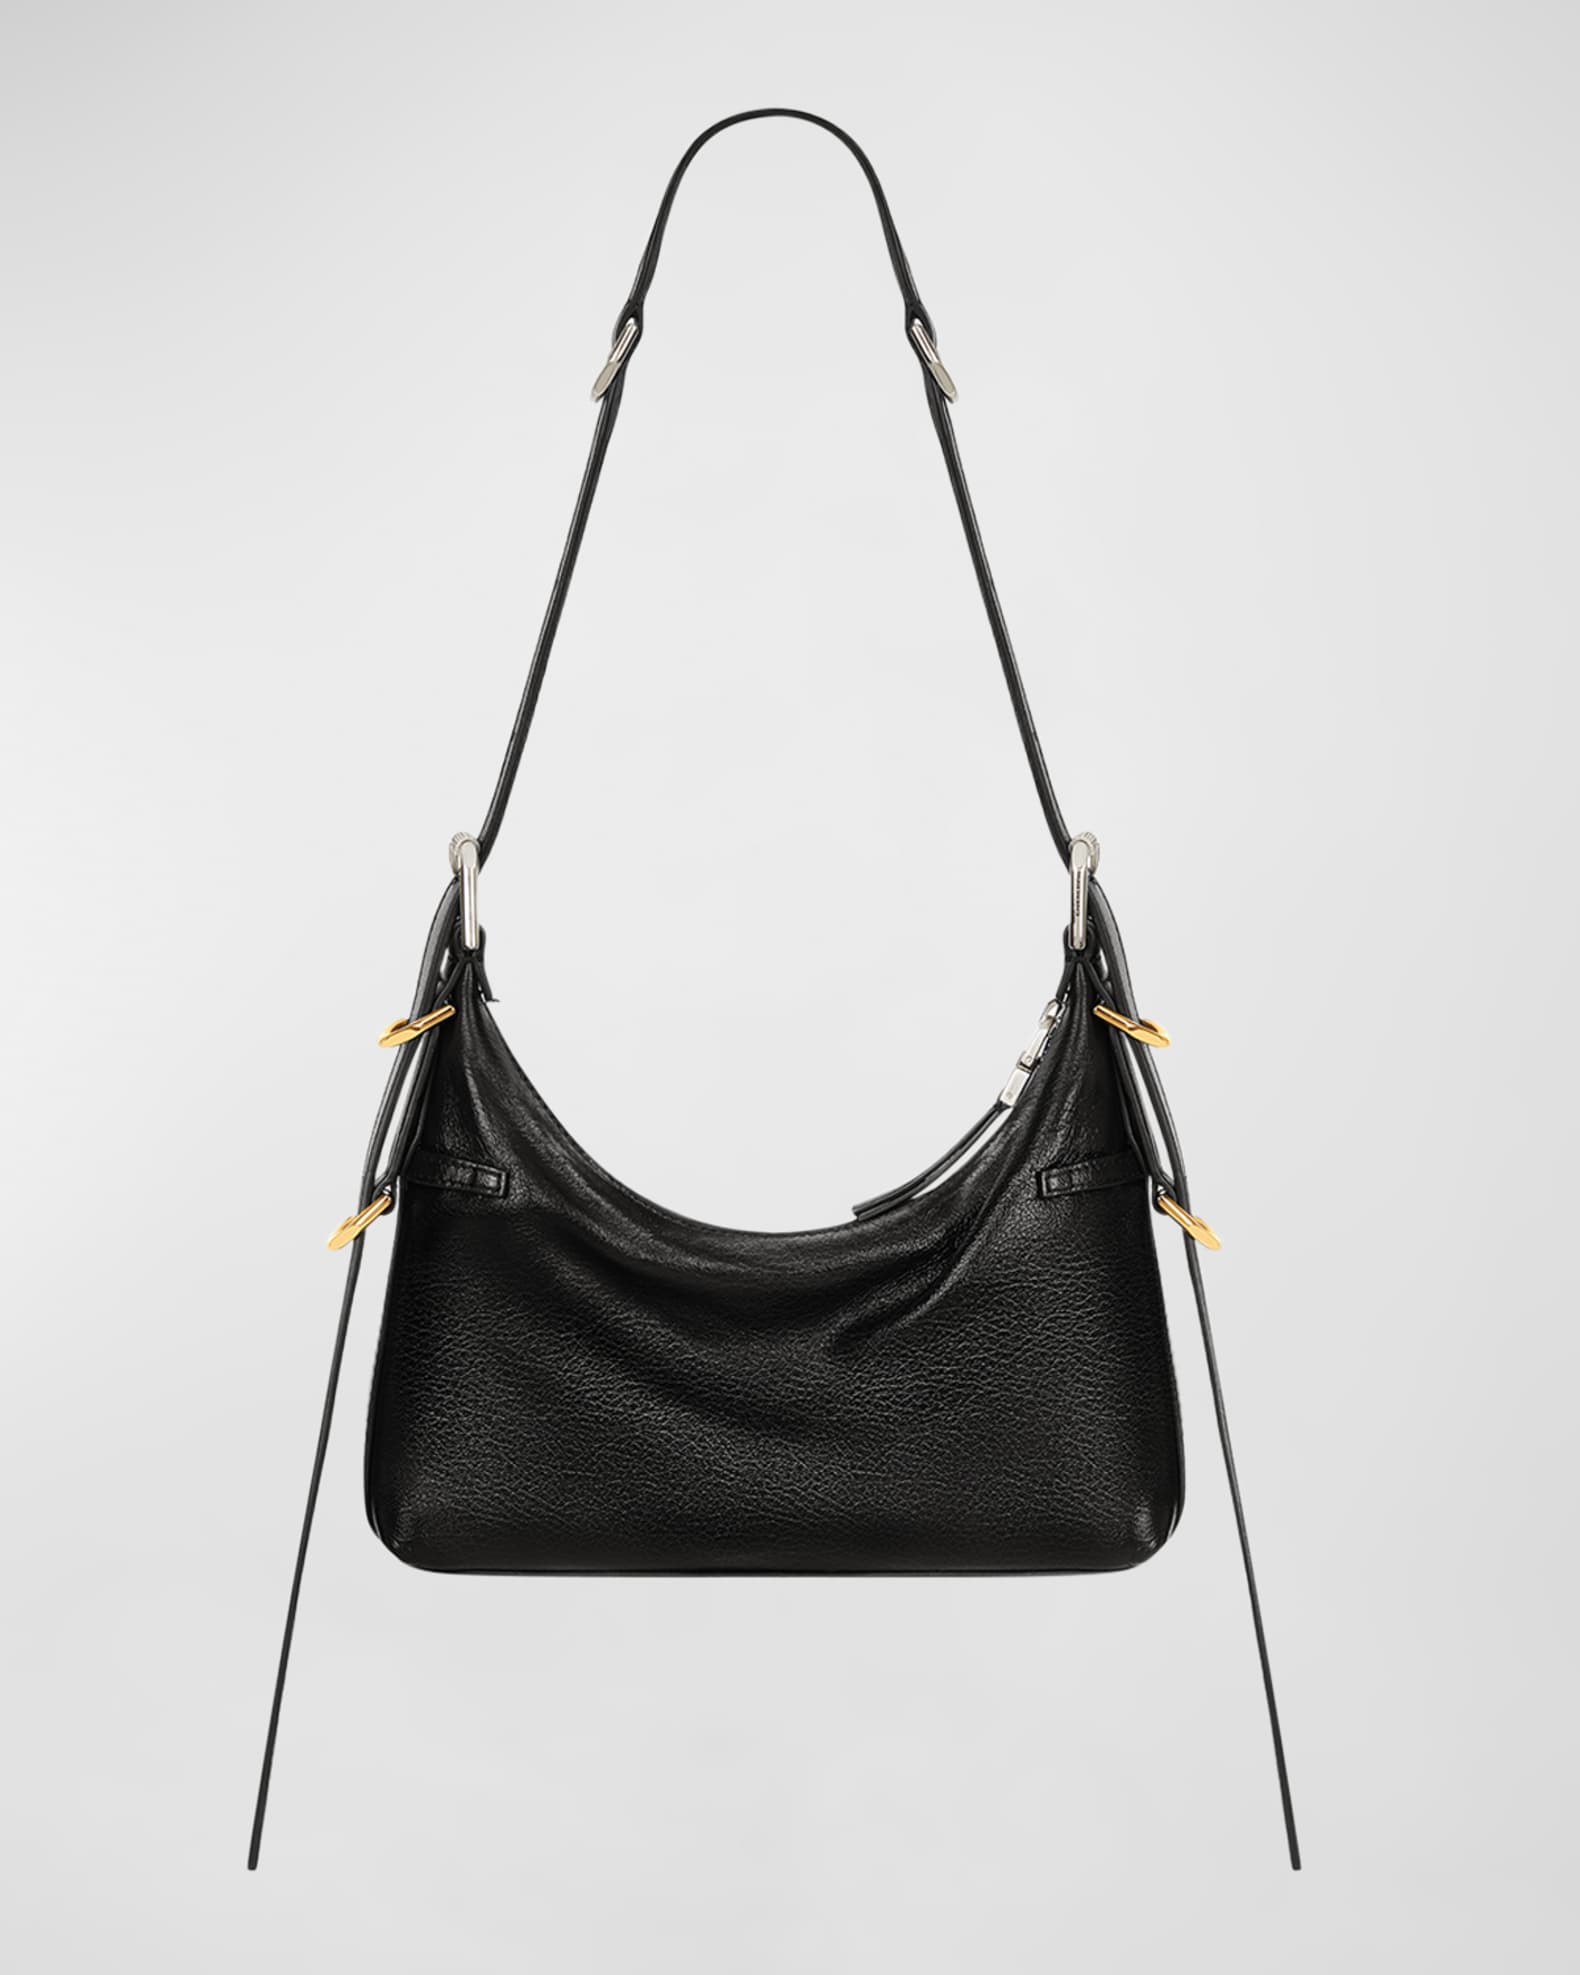 Givenchy Voyou Mini Shoulder Bag in Tumbled Leather | Neiman Marcus